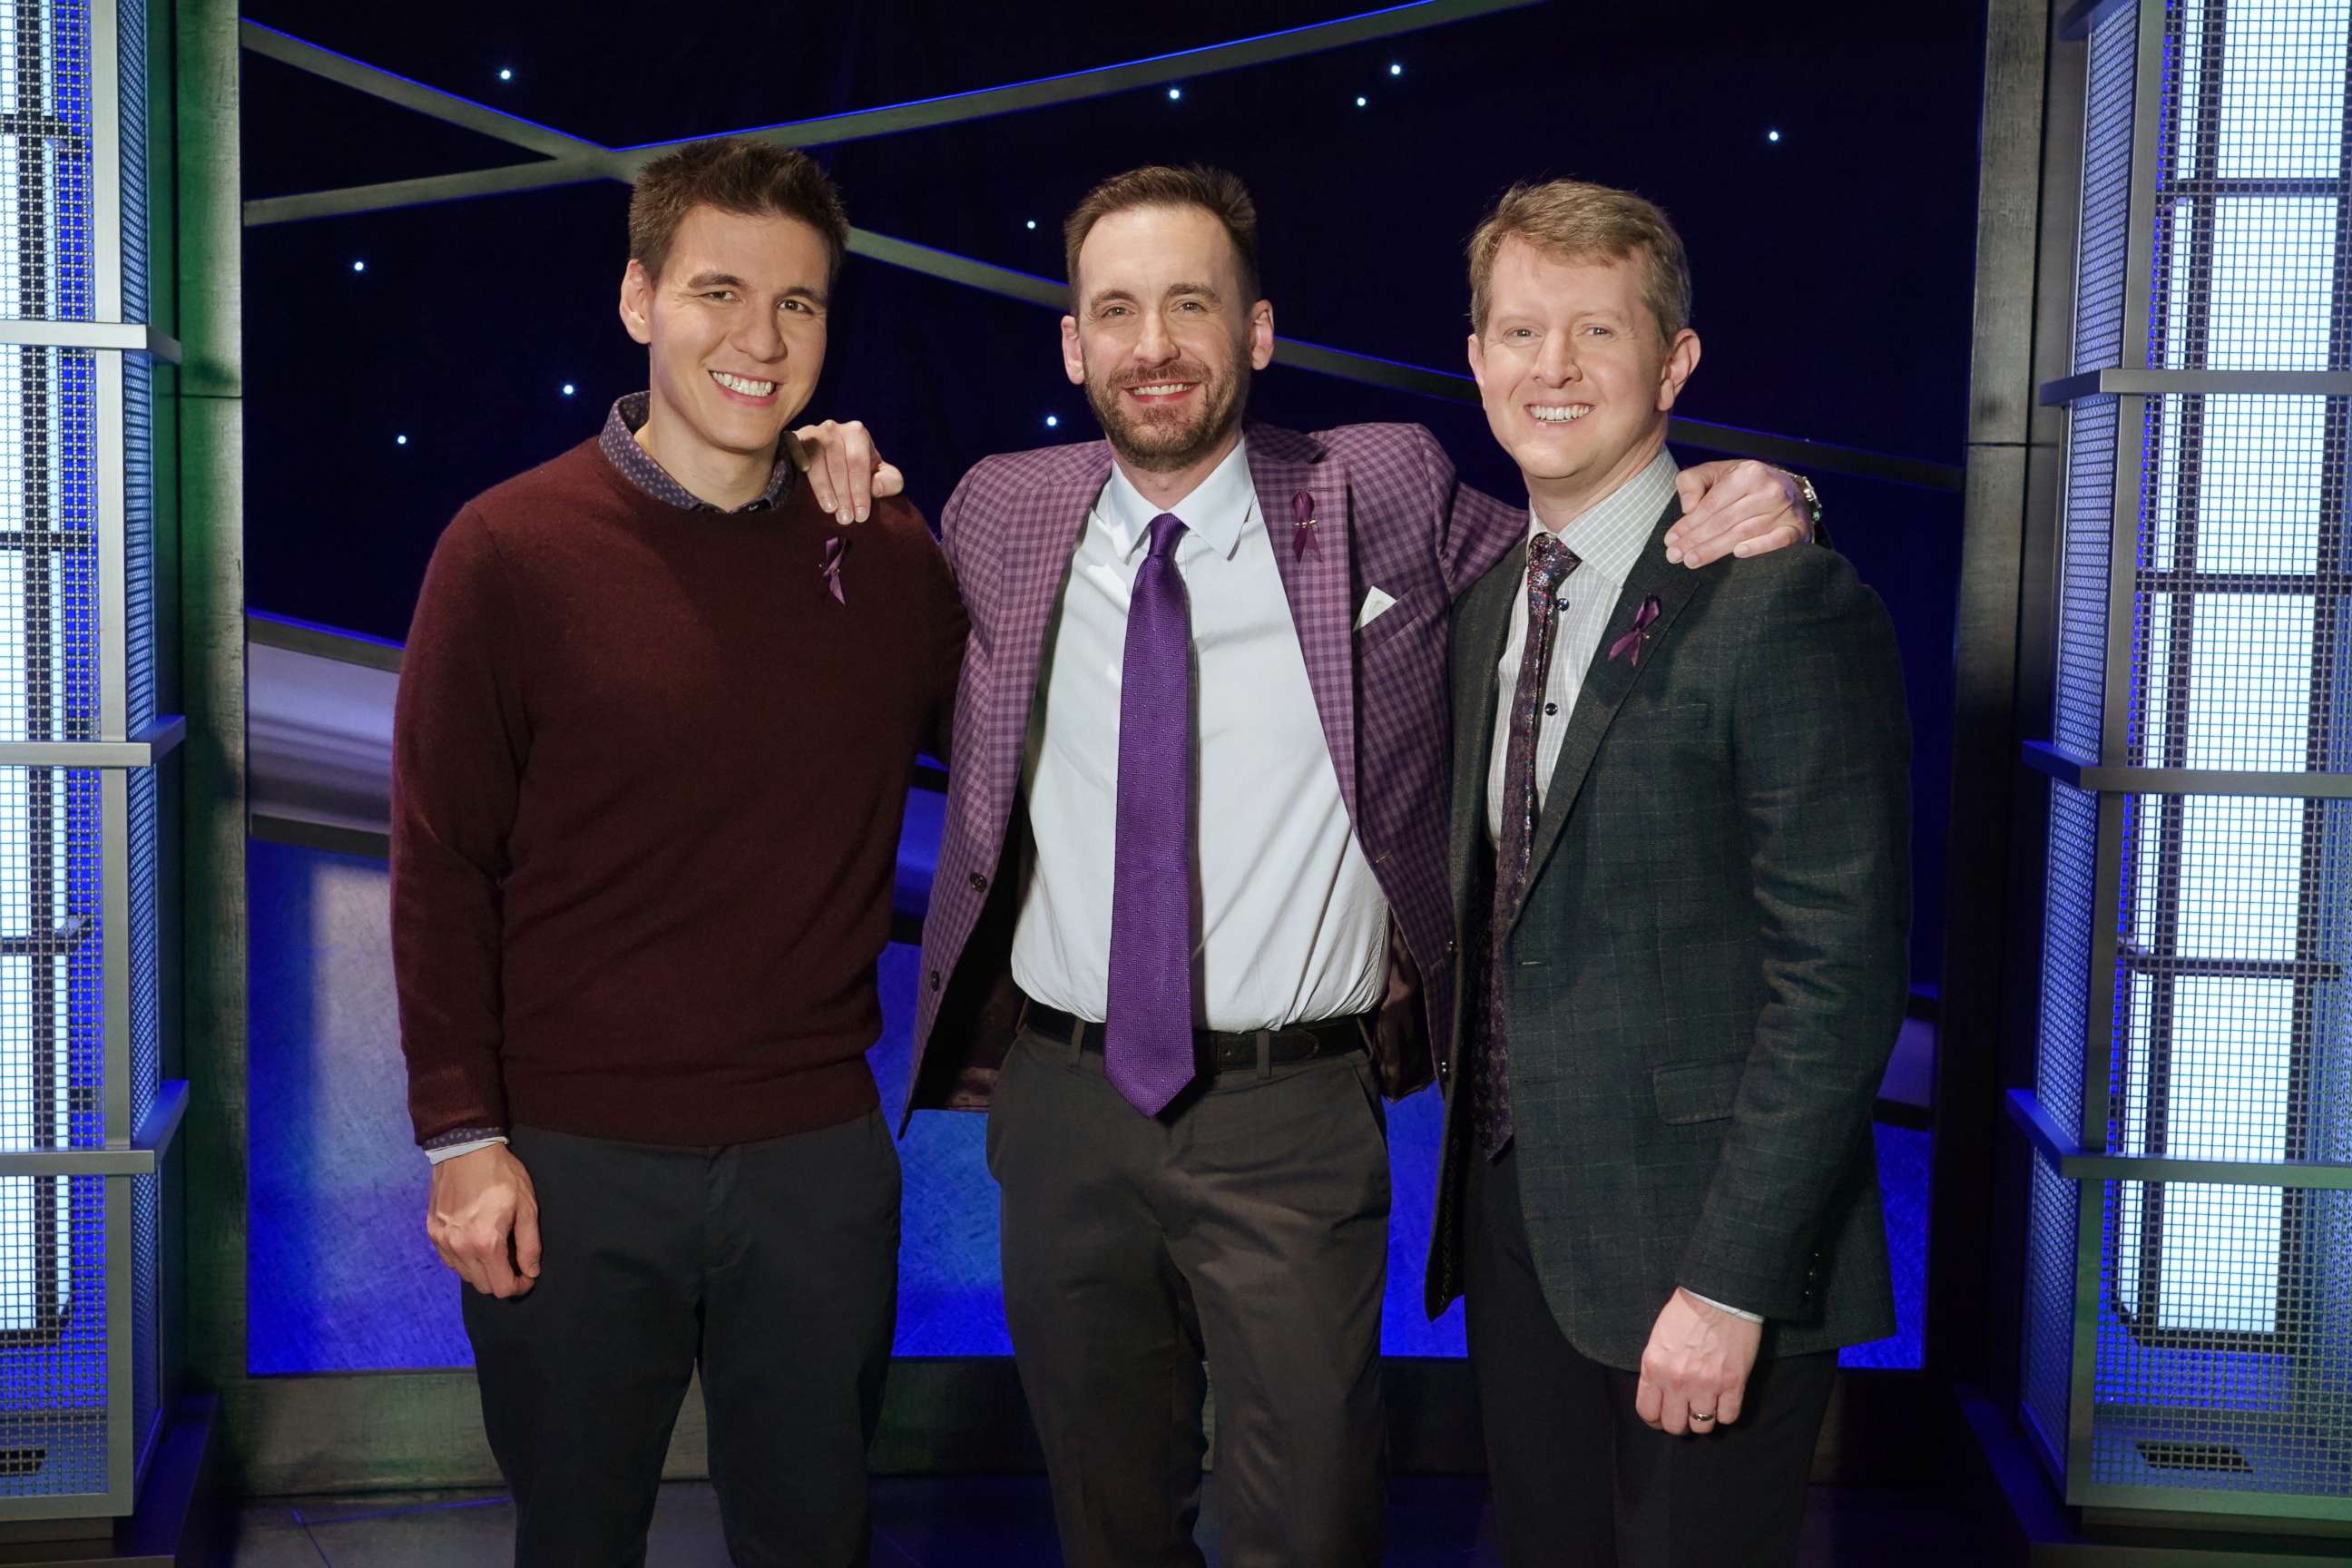 PHOTO: "JEOPARDY! The Greatest of All Time" contestants, from left, James Holzhauer, Brad Rutter and Ken Jennings.